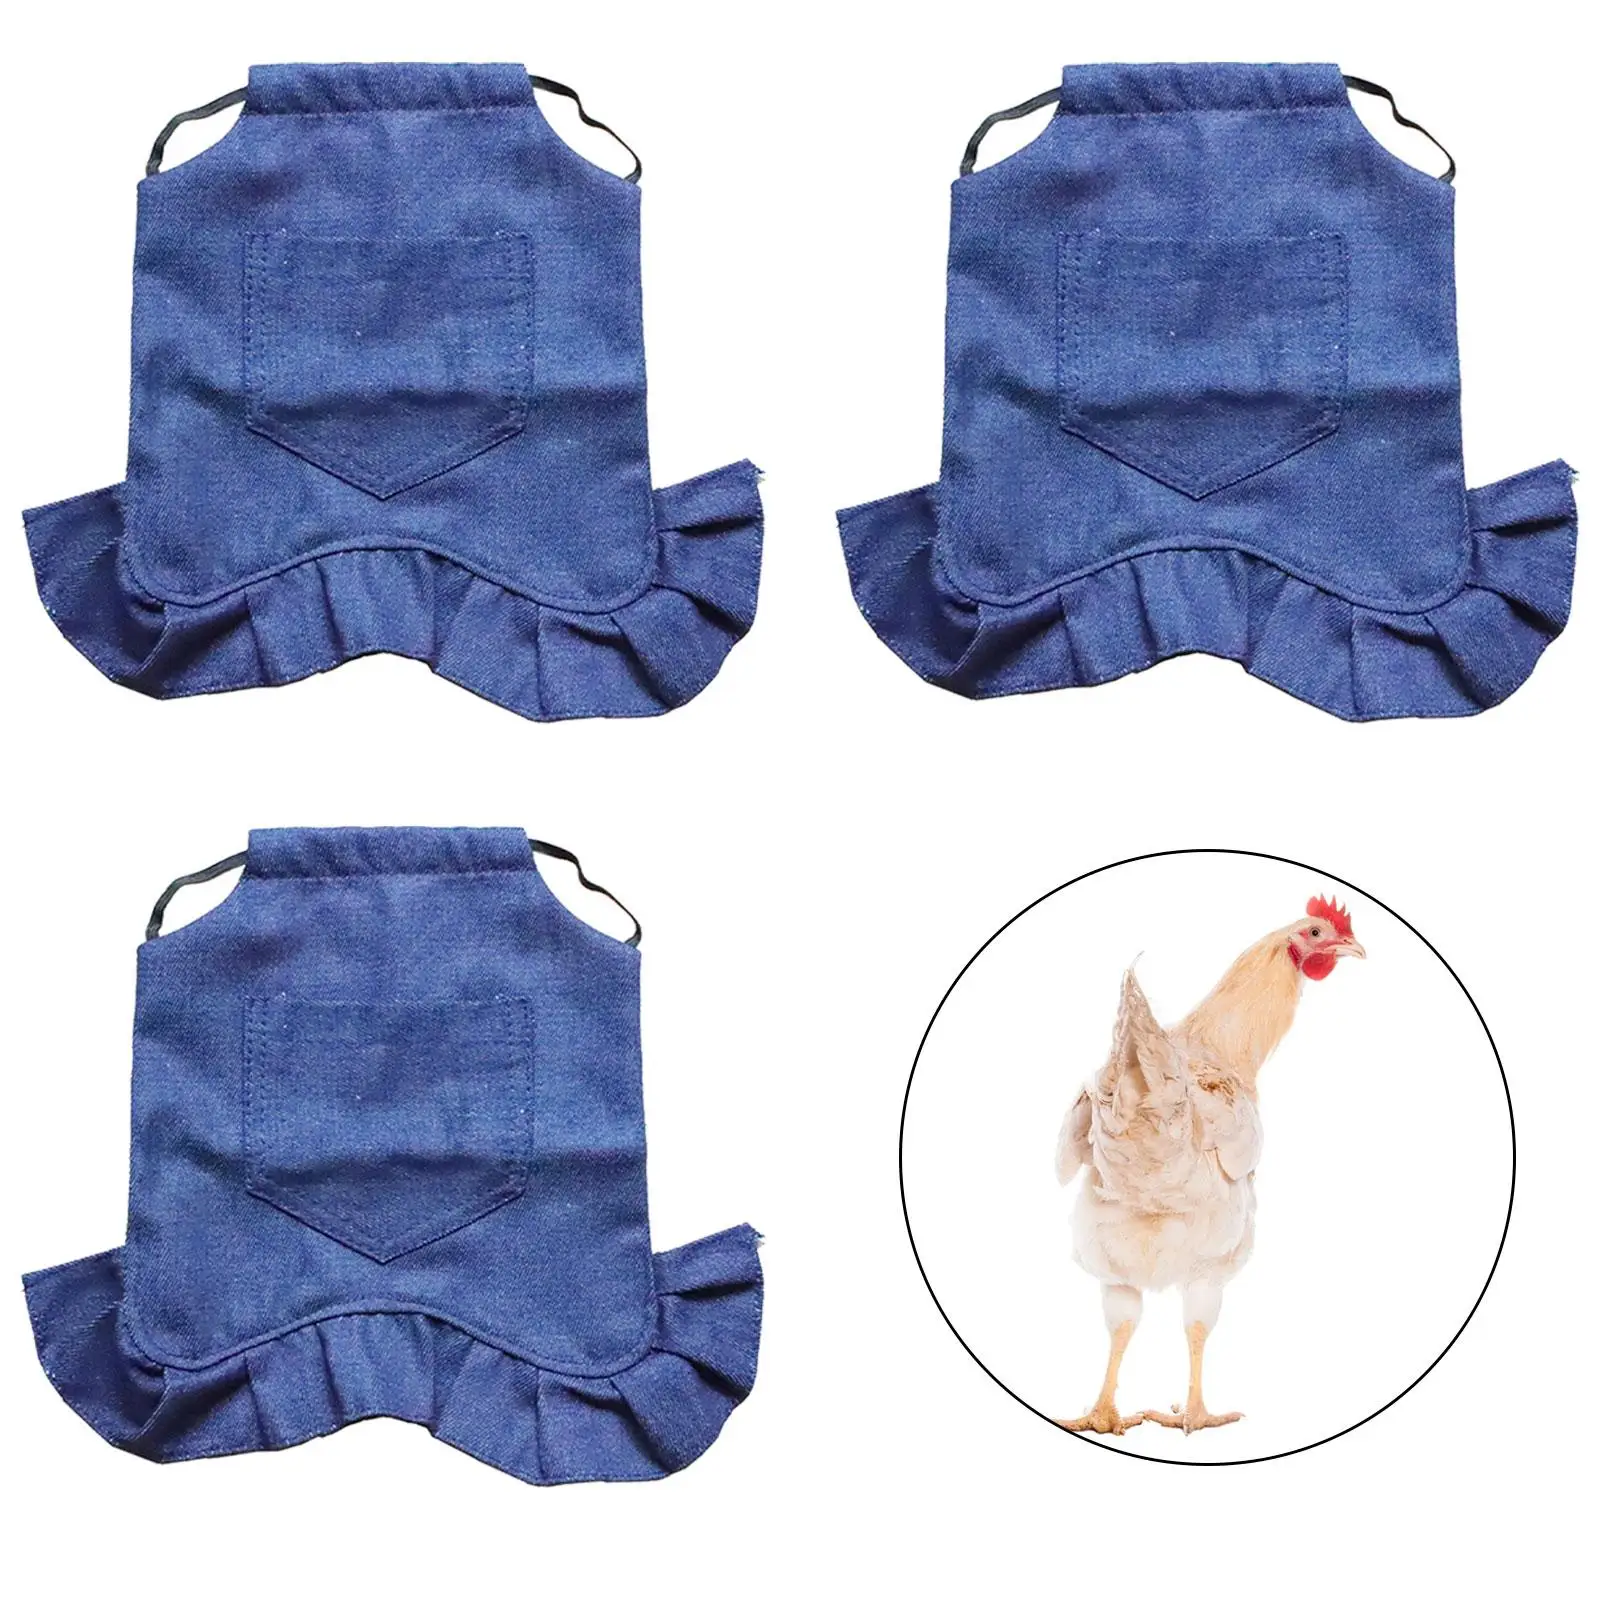 3x Chicken Saddle Hens with Wing Protector Protective Hen Aprons Chickens